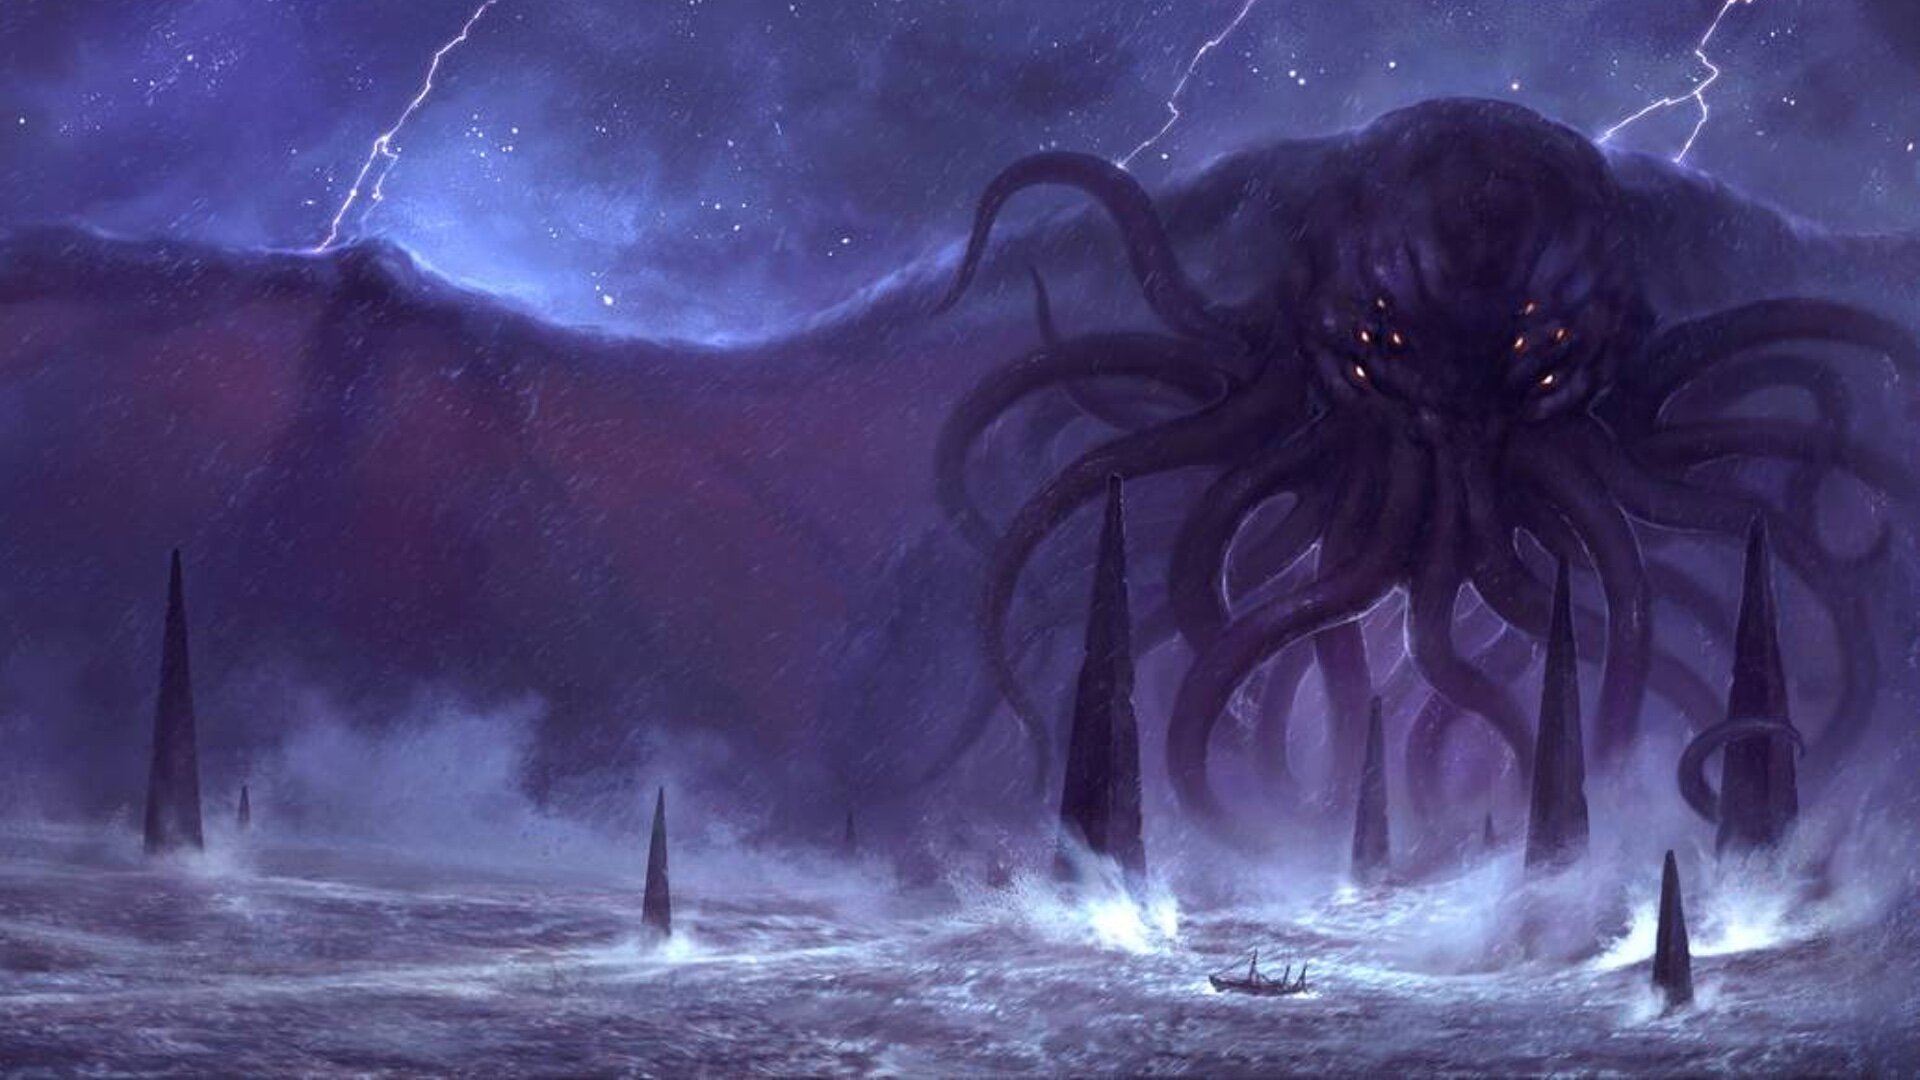 Call Of Cthulhu Is Gaining Ground With Roll20 Users According To